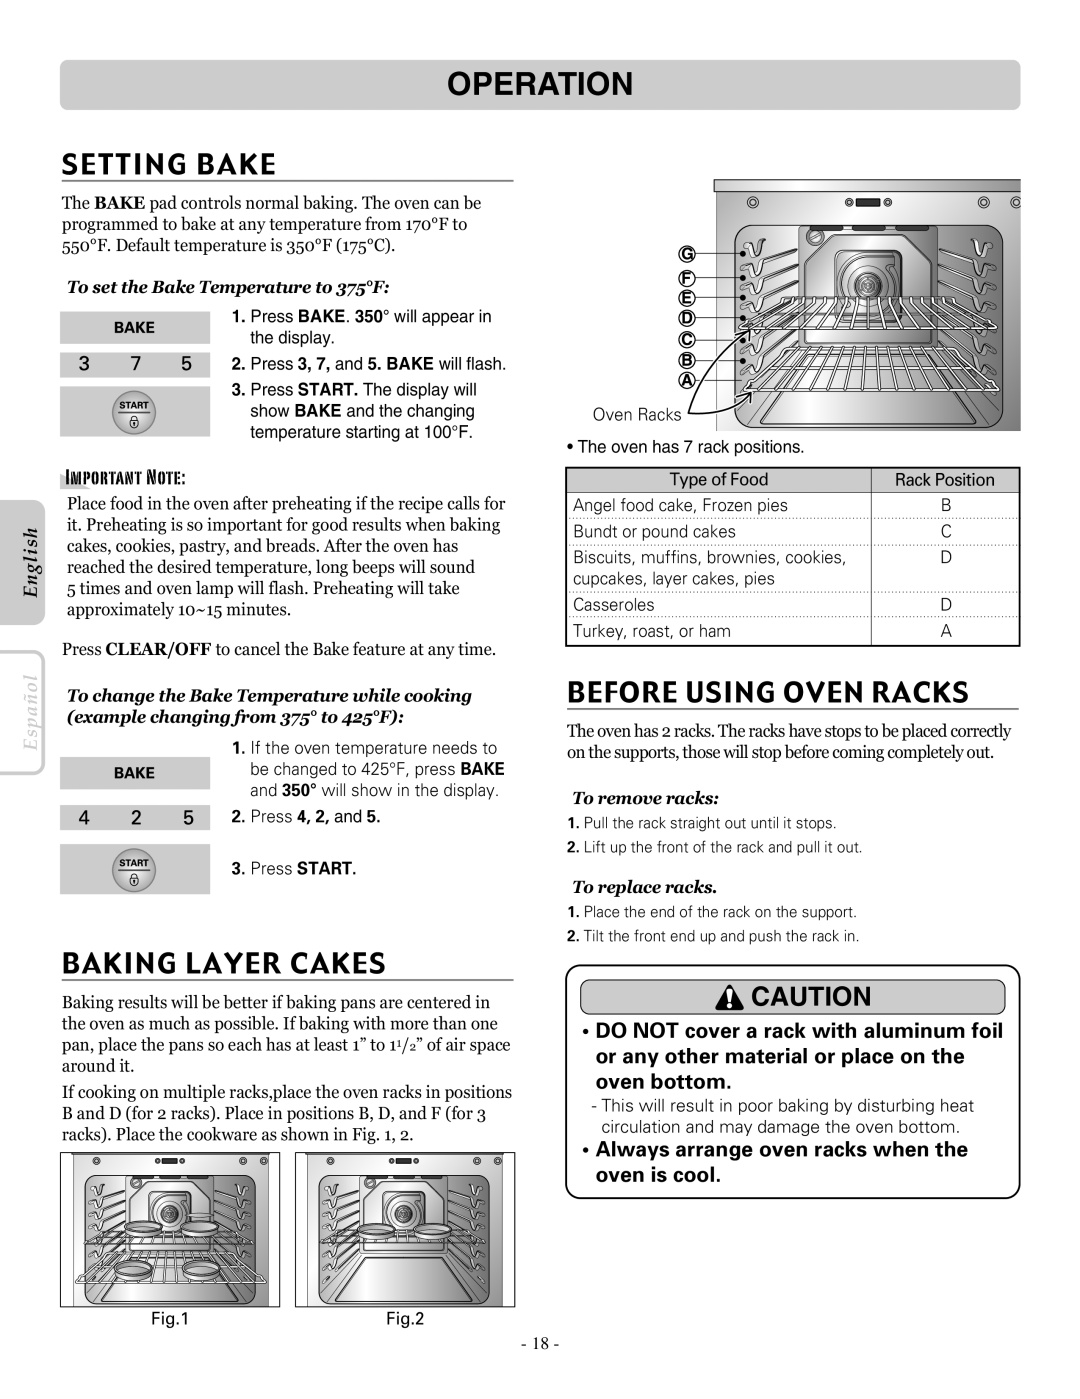 LG Electronics LRE30453SW Setting Bake, Baking Layer Cakes, Before Using Oven Racks, Important Note, oven bottom 